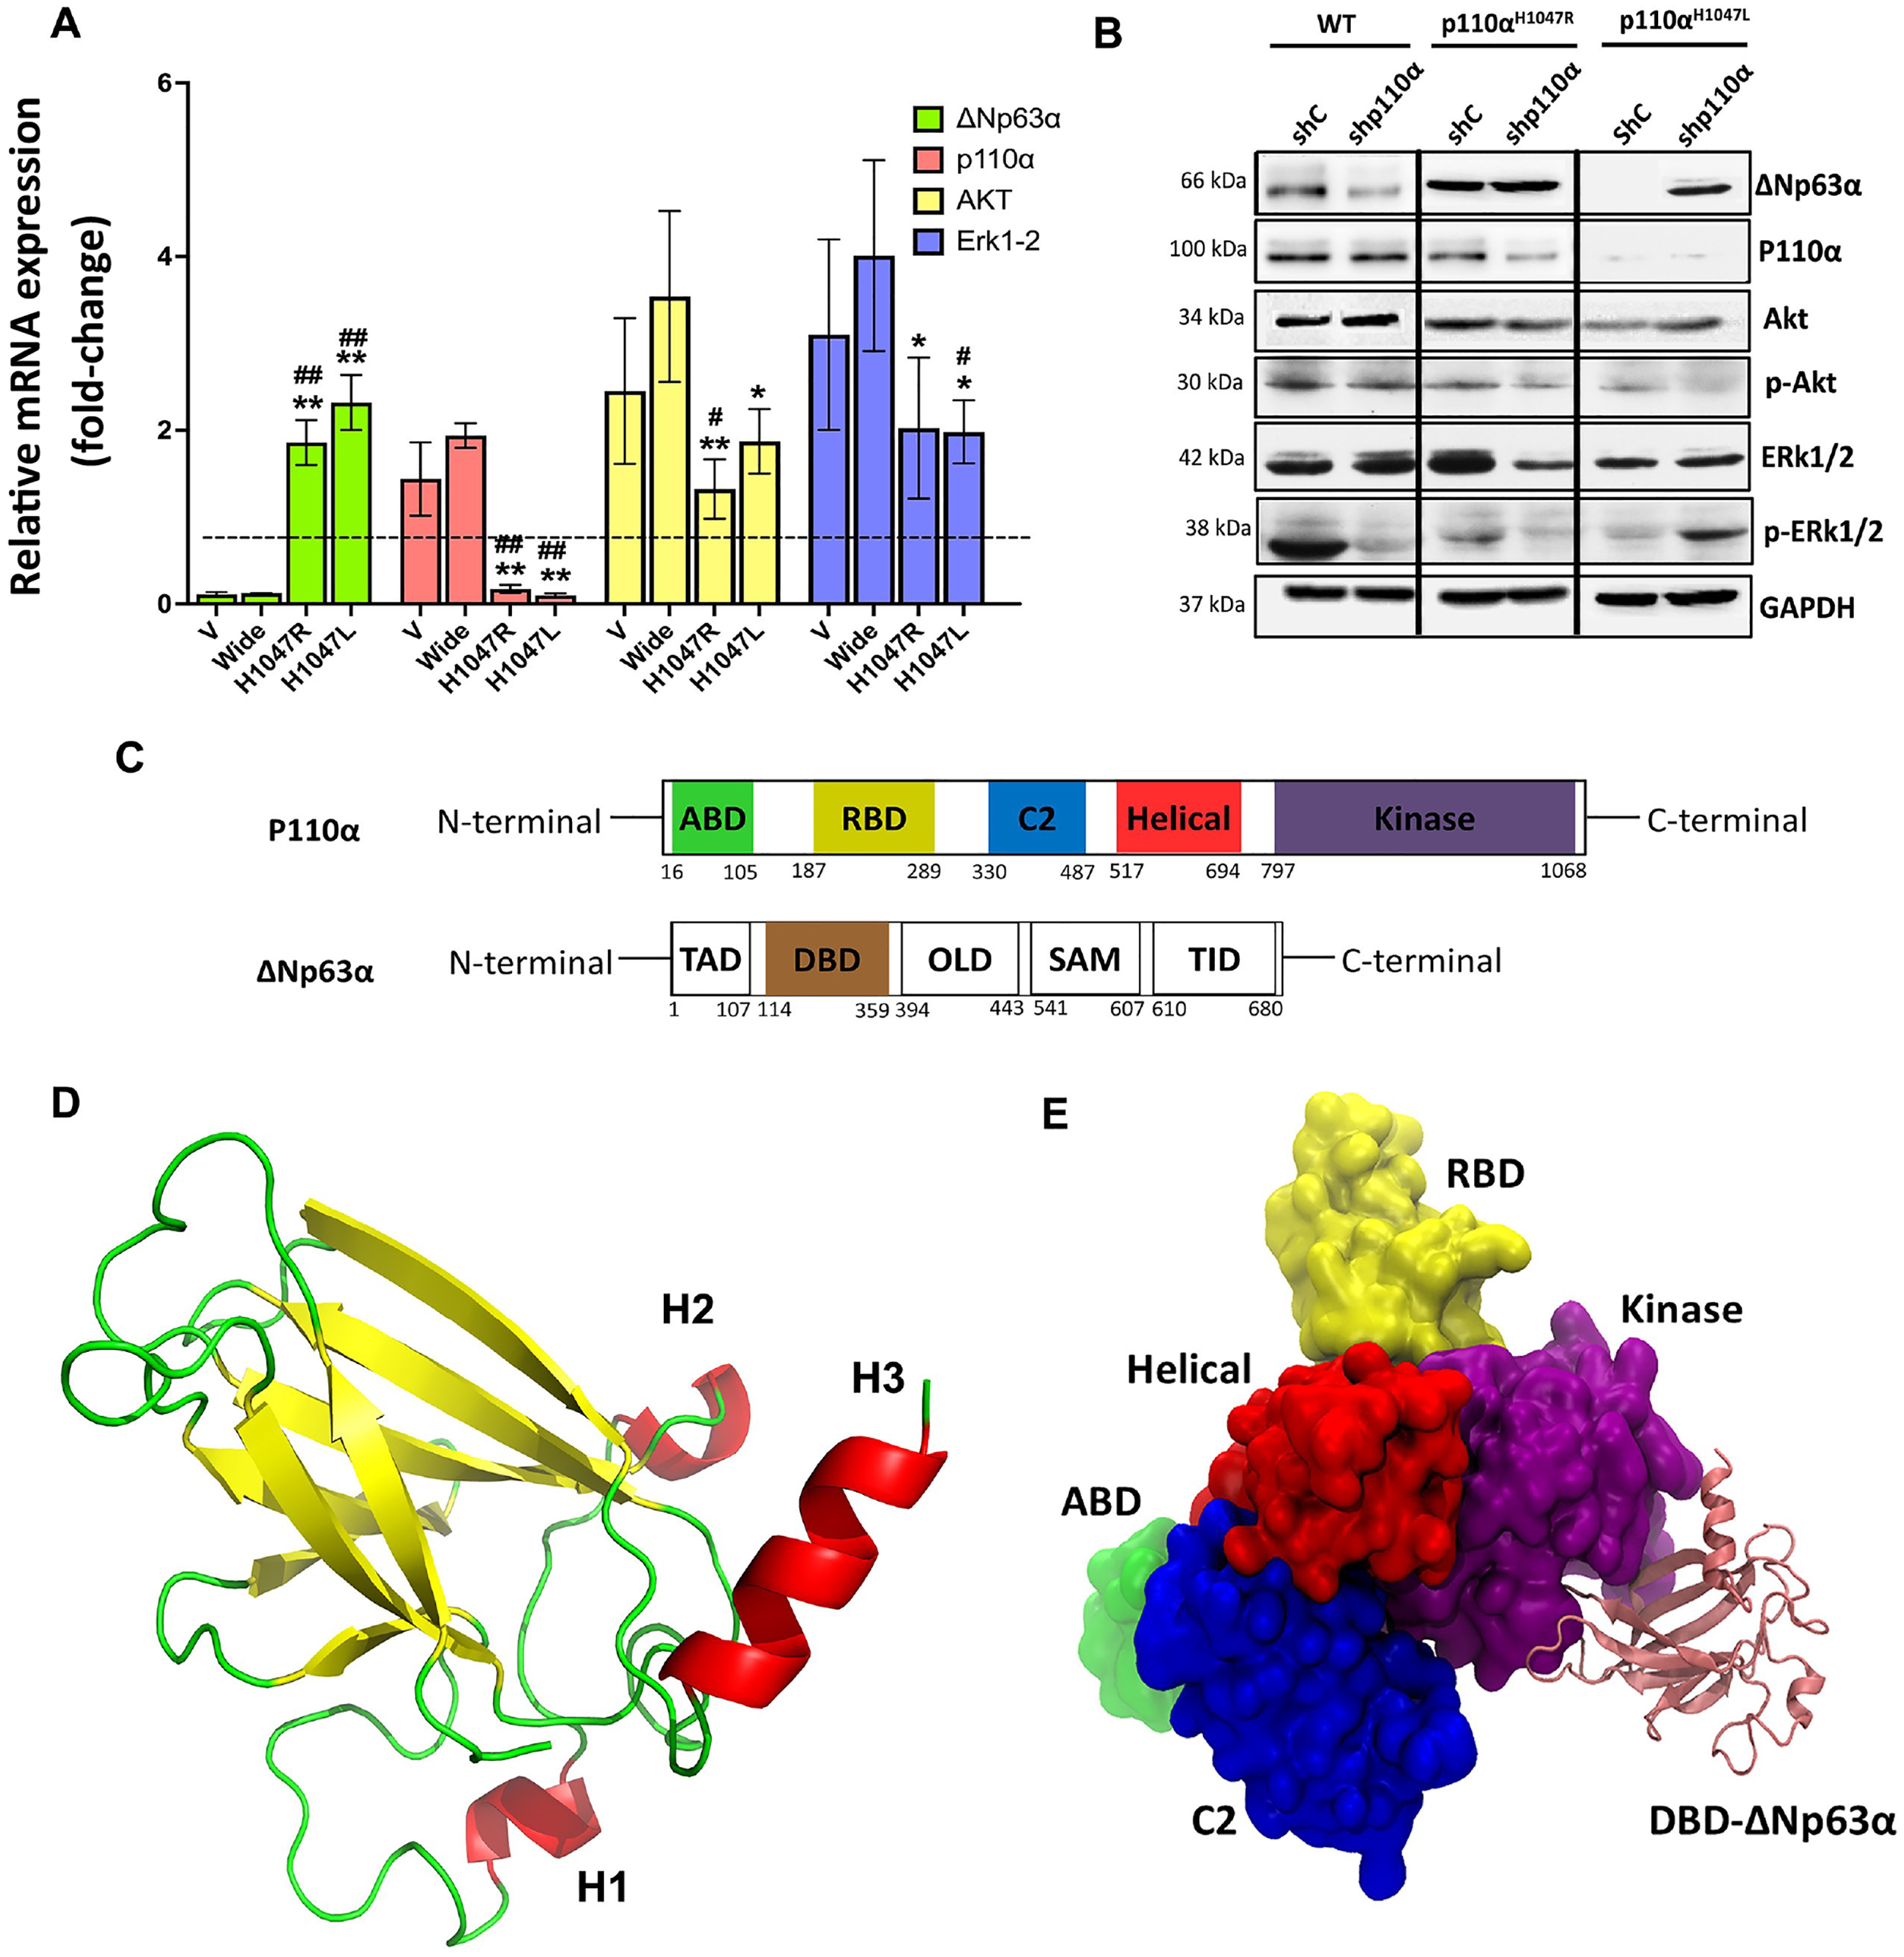 Inhibition of ΔNp63α expression by p110αH1047L via Akt1-mediated inhibition and tyrosine kinase receptor signaling. The BT-549 cells were transduced with recombinant retroviruses encoding wild-type p110α (WT) and mutant derivatives (H1047L or H1047R). (A) qRT-PCR data and (B) representative western blot analysis of p110α, ΔNp63α, and Akt1-mediated signaling pathways in various groups. (C) Structure and Domain Organization of the p110α/ΔNp63α Complex. Schematic representation of the ΔNp63α and P110α protein isoforms. (D) The tertiary structure of ΔNp63α. The DBD domain contains three important helices, H1 (residues 234–236), H2 (residues 245–249), and H3 (residues 348–355), which play a crucial role in the interaction with PIK3. (E) The p110α/ΔNp63α complex’s 3D structure highlights its contacts with the kinase, helical, ABD, RBD, and C2 domains of PIK3CA. The different domains of PIK3CA are colored for visual differentiation, with the ABD (residues 16–105) in green, the RBD (residues 187–289) in yellow, the C2 domain (residues 330–487) in blue, the helical domain (residues 517–694) in red, the kinase domain (residues 797–1068) in purple, and the ΔNp63α DBD in pink. Western blotting was performed on whole-cell lysates (50–70μg) using GAPDH as a control. Values are presented as mean±SEM, n = 3, *P < 0.05 and **P < 0.001 compared to the V group and #P < 0.05, and ##P < 0.01 versus the WT group.